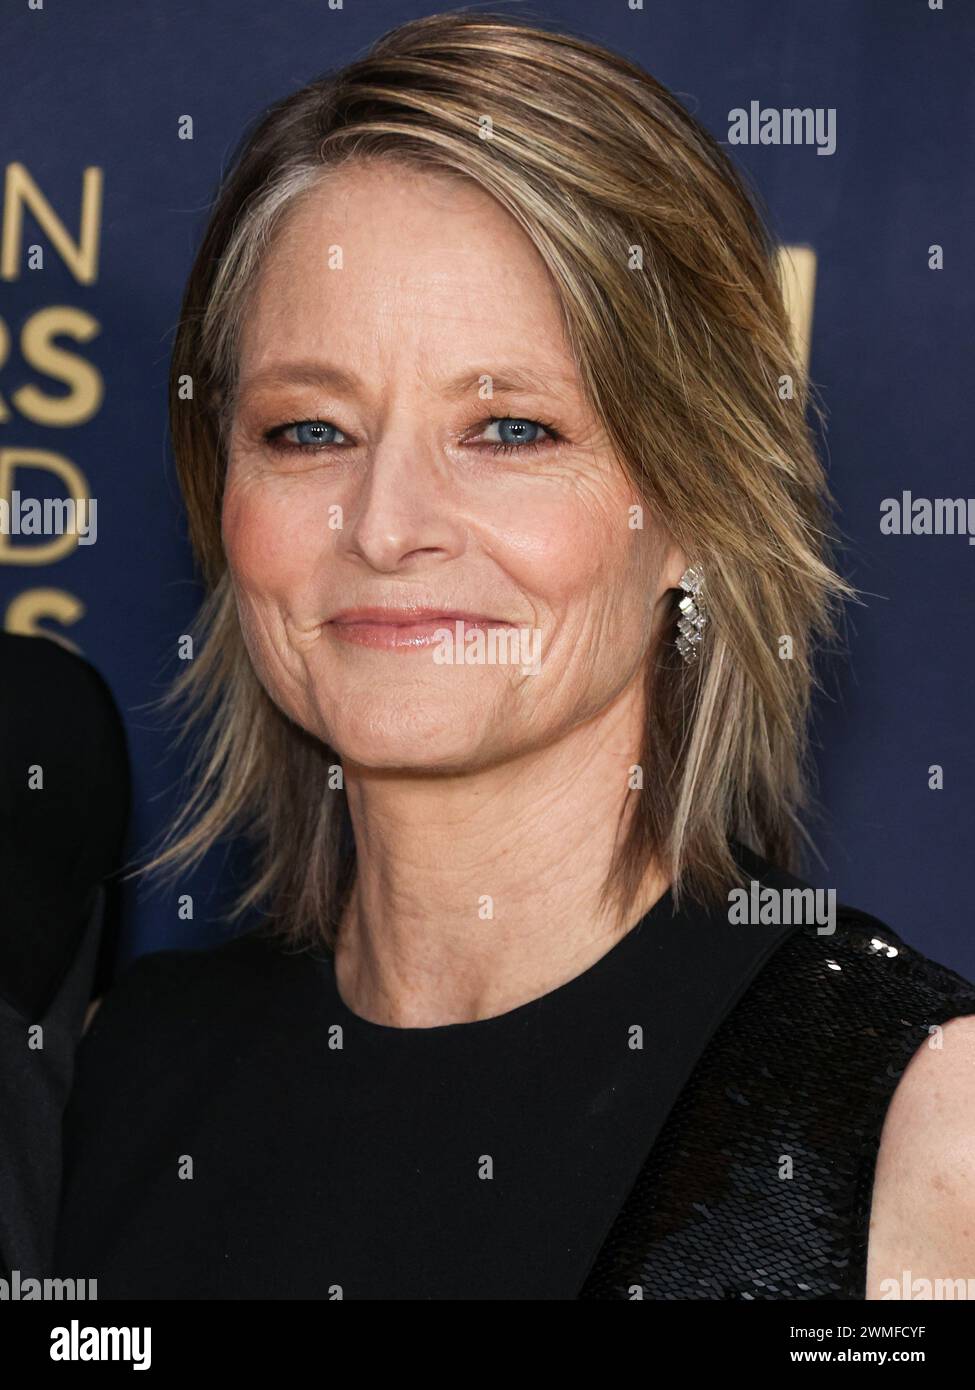 LOS ANGELES, CALIFORNIA, USA - FEBRUARY 24: Jodie Foster arrives at the 30th Annual Screen Actors Guild Awards held at the Shrine Auditorium and Expo Hall on February 24, 2024 in Los Angeles, California, United States. (Photo by Xavier Collin/Image Press Agency) Stock Photo